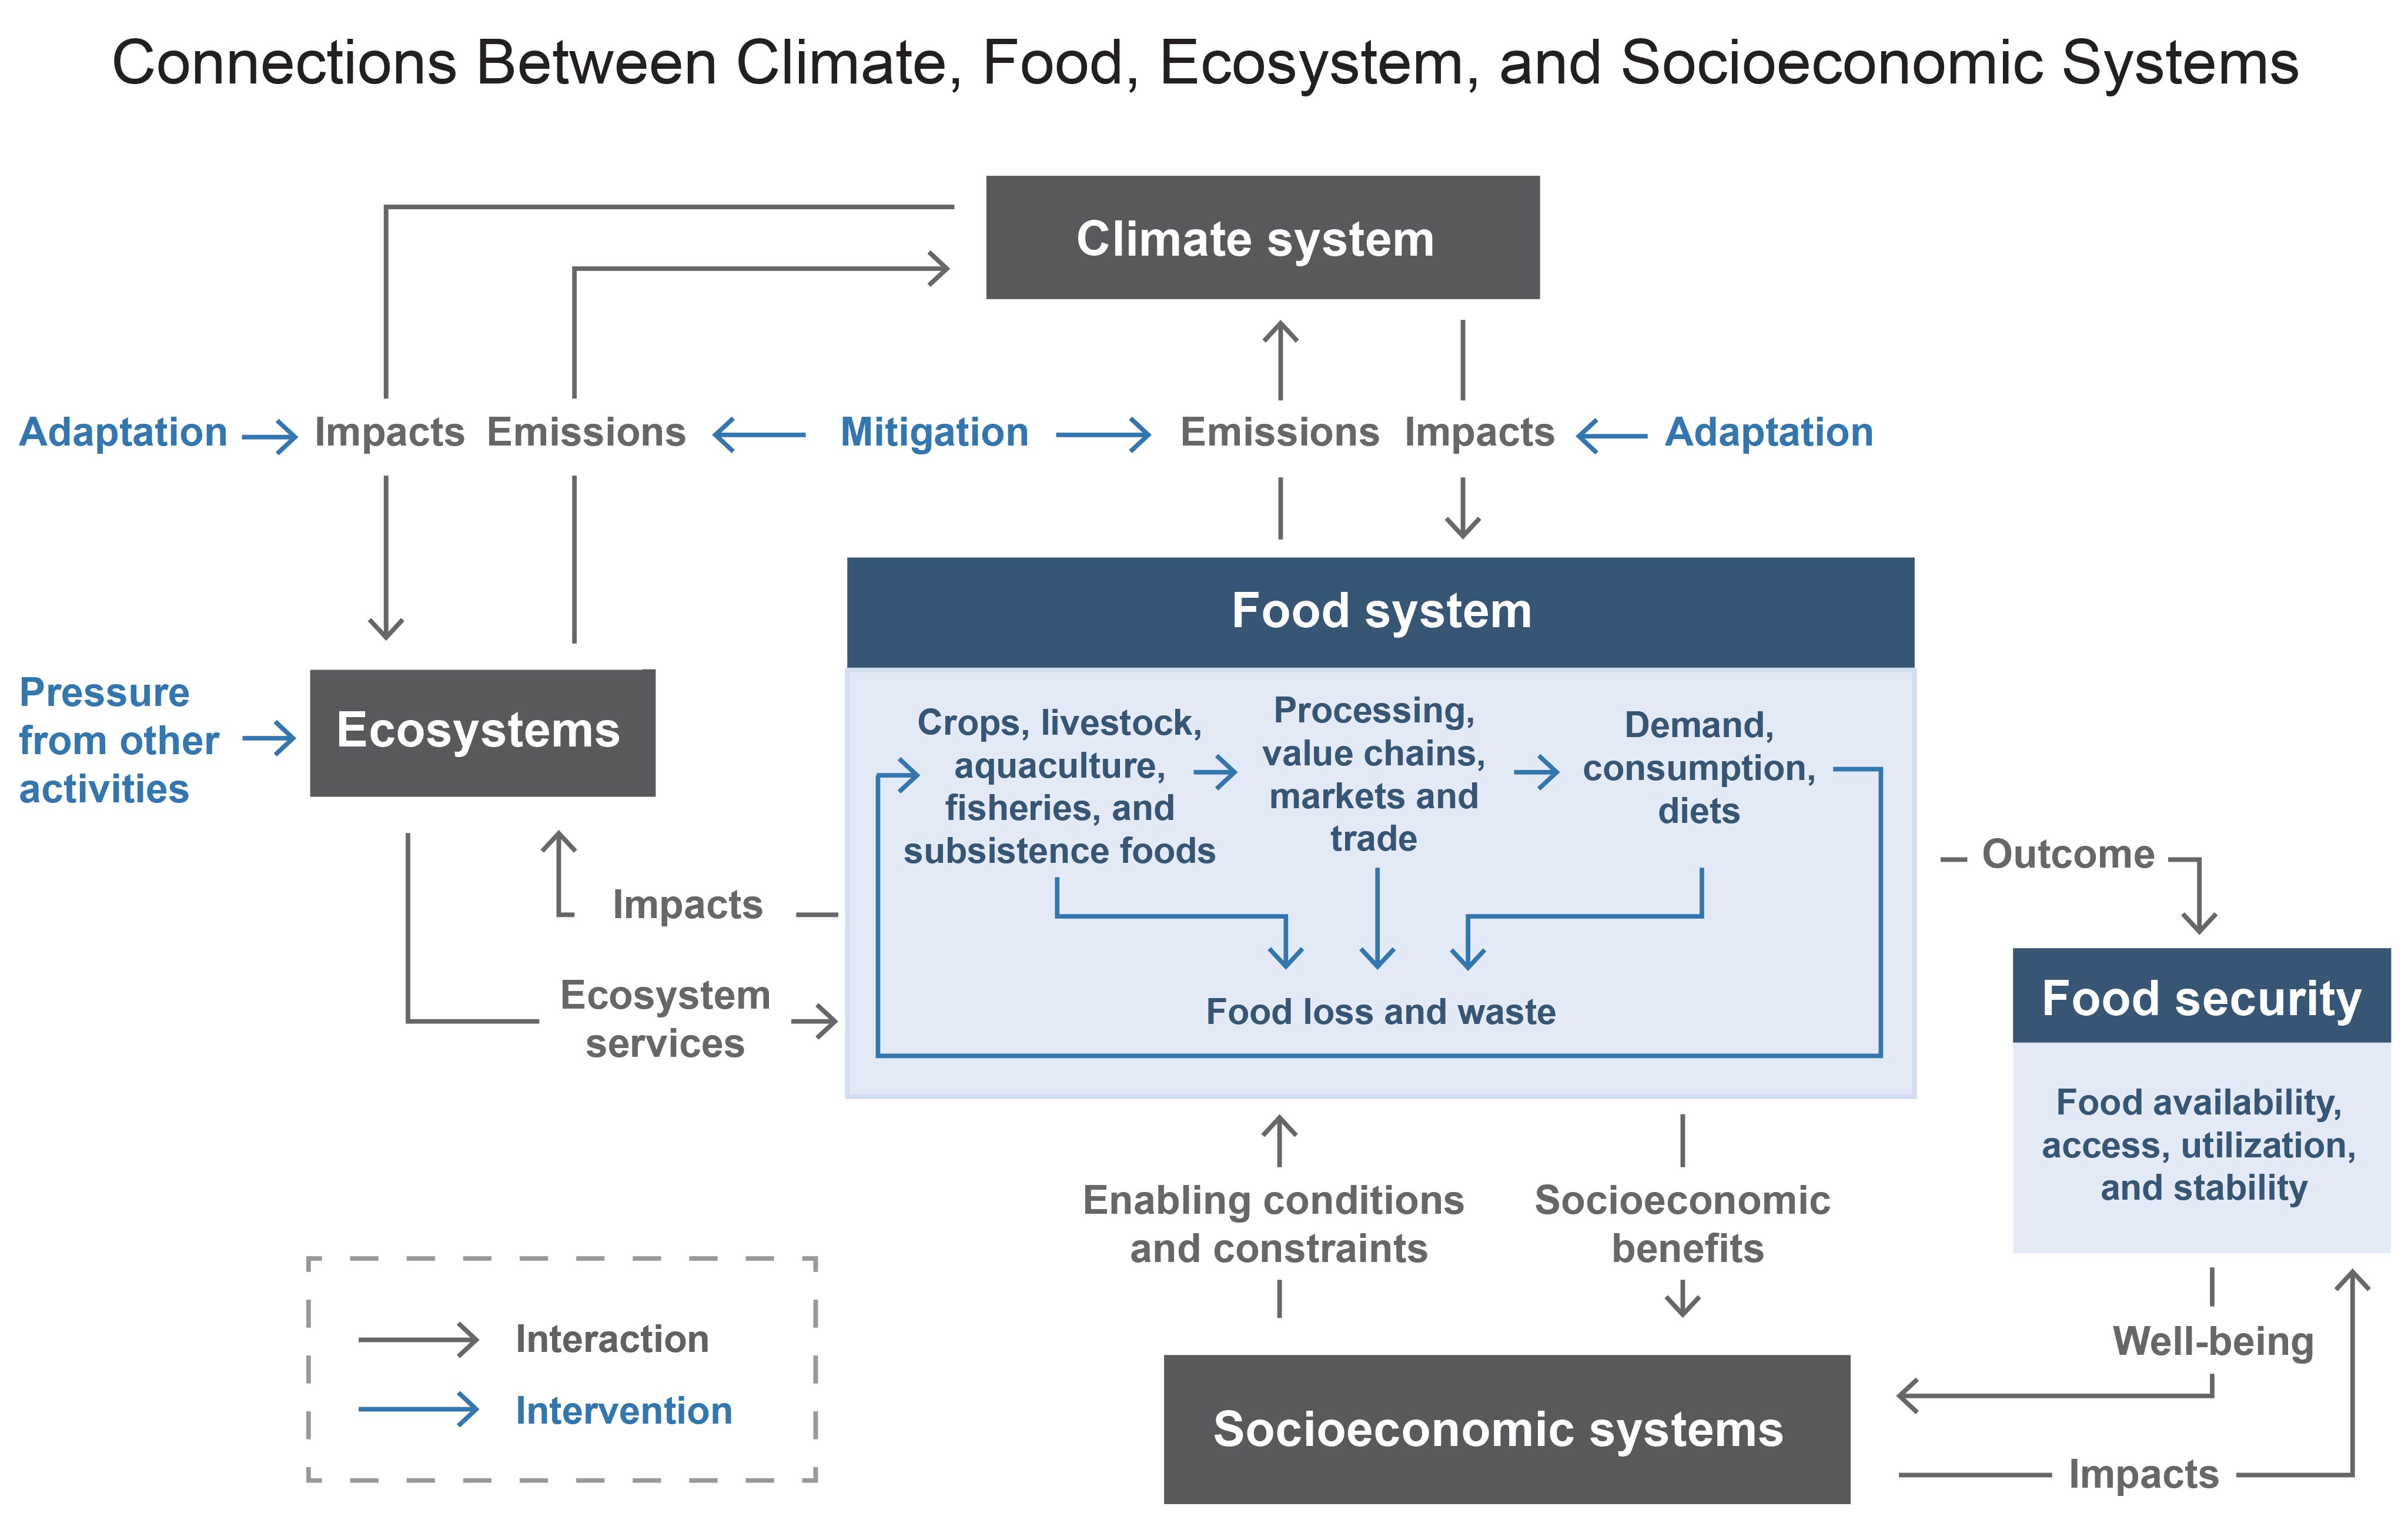 Connections Between Climate, Food, Ecosystem, and Socioeconomic Systems